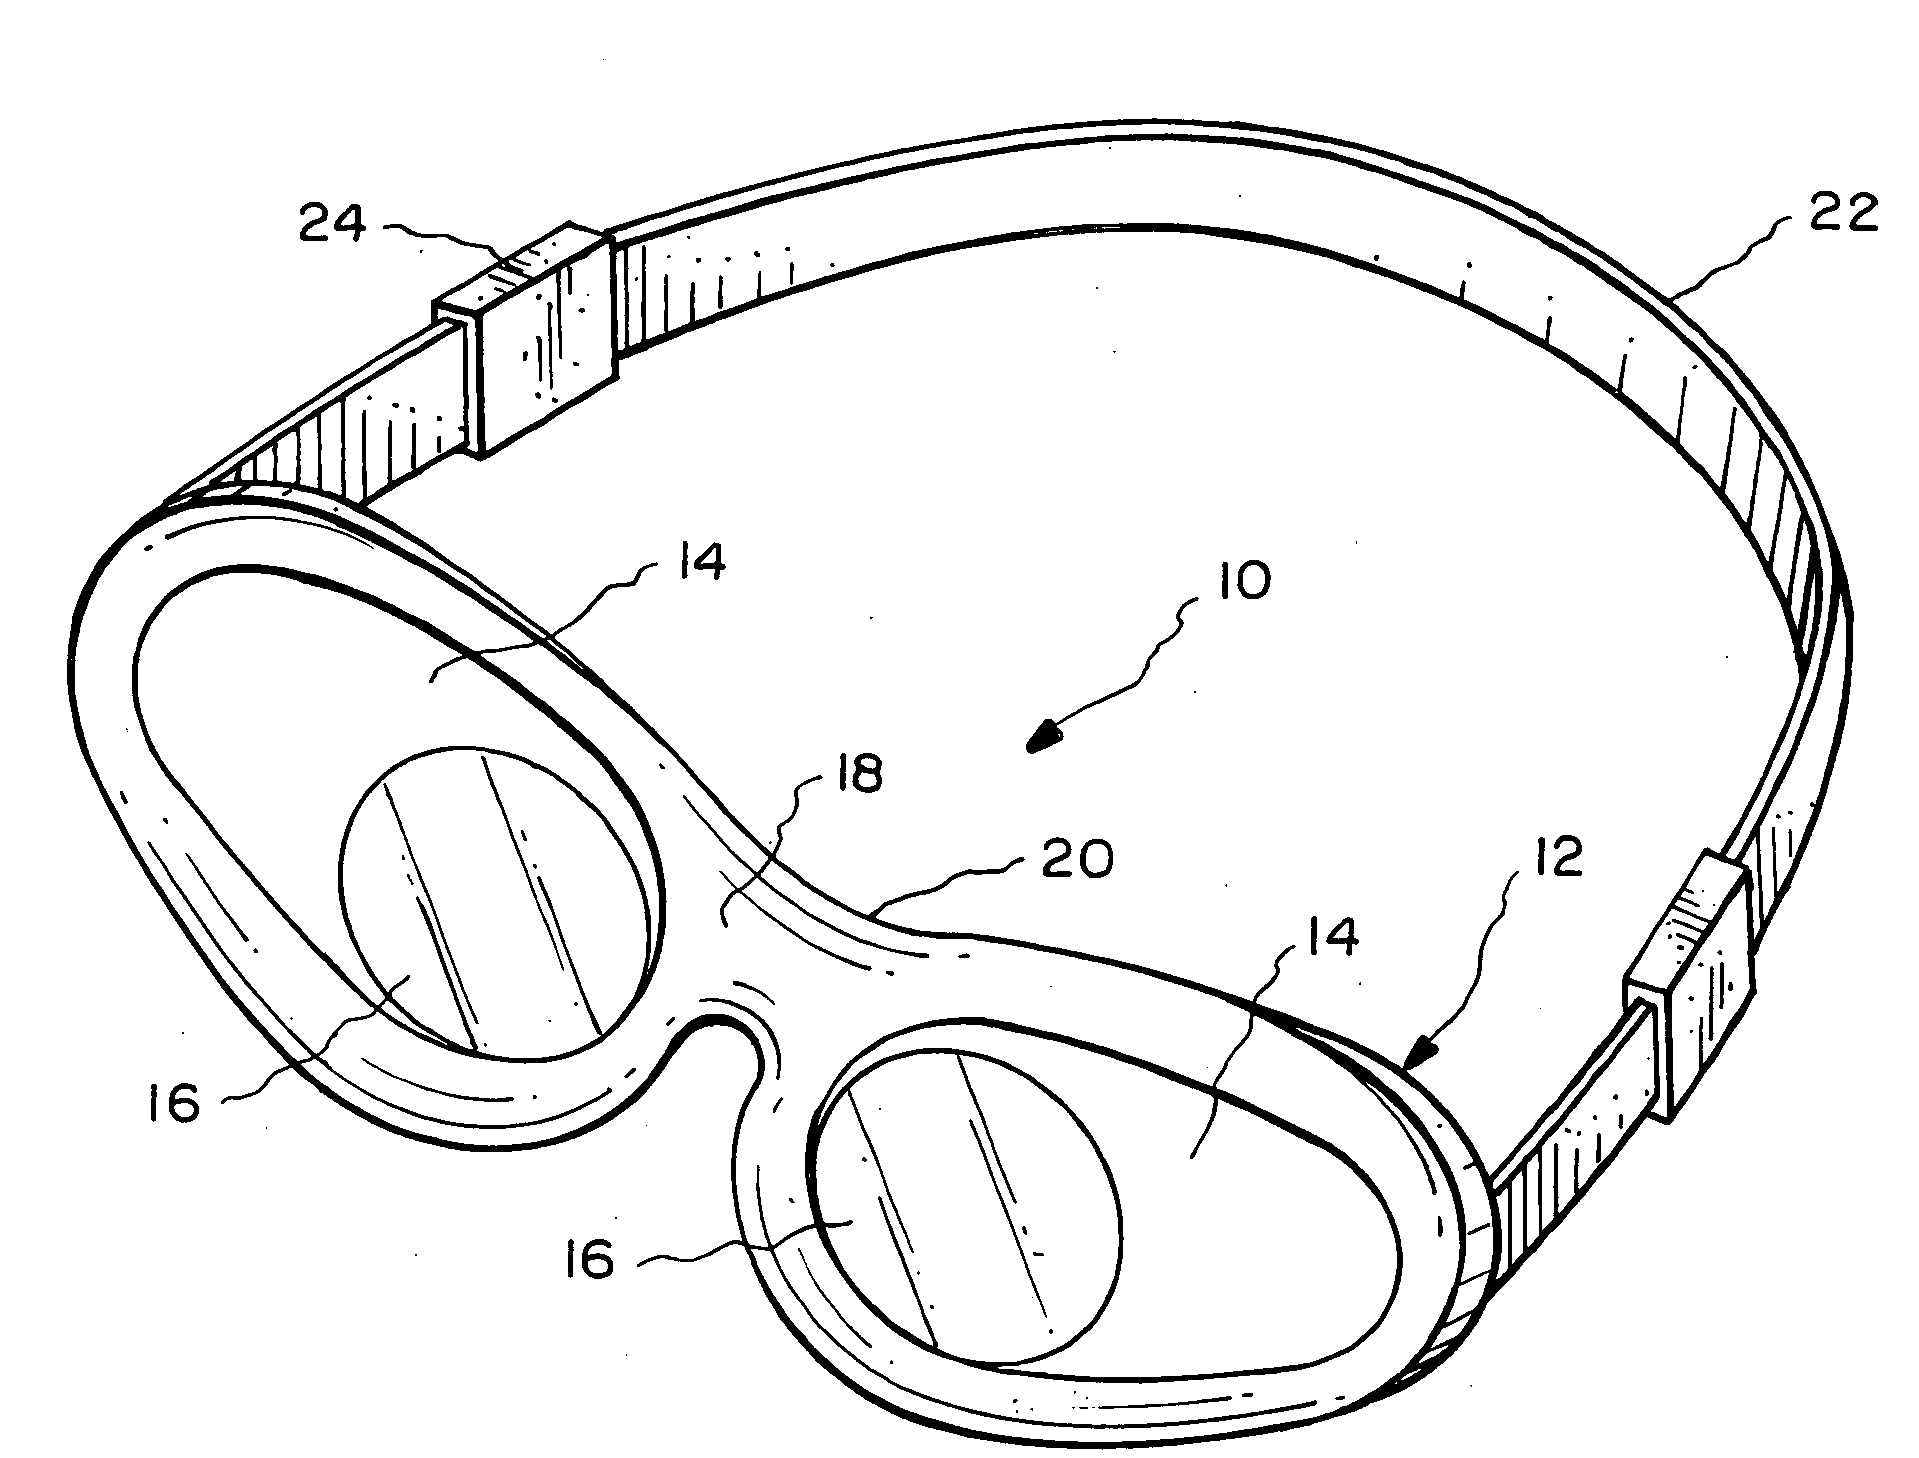 Eye Goggles Having Opaque or Restricted View Lenses